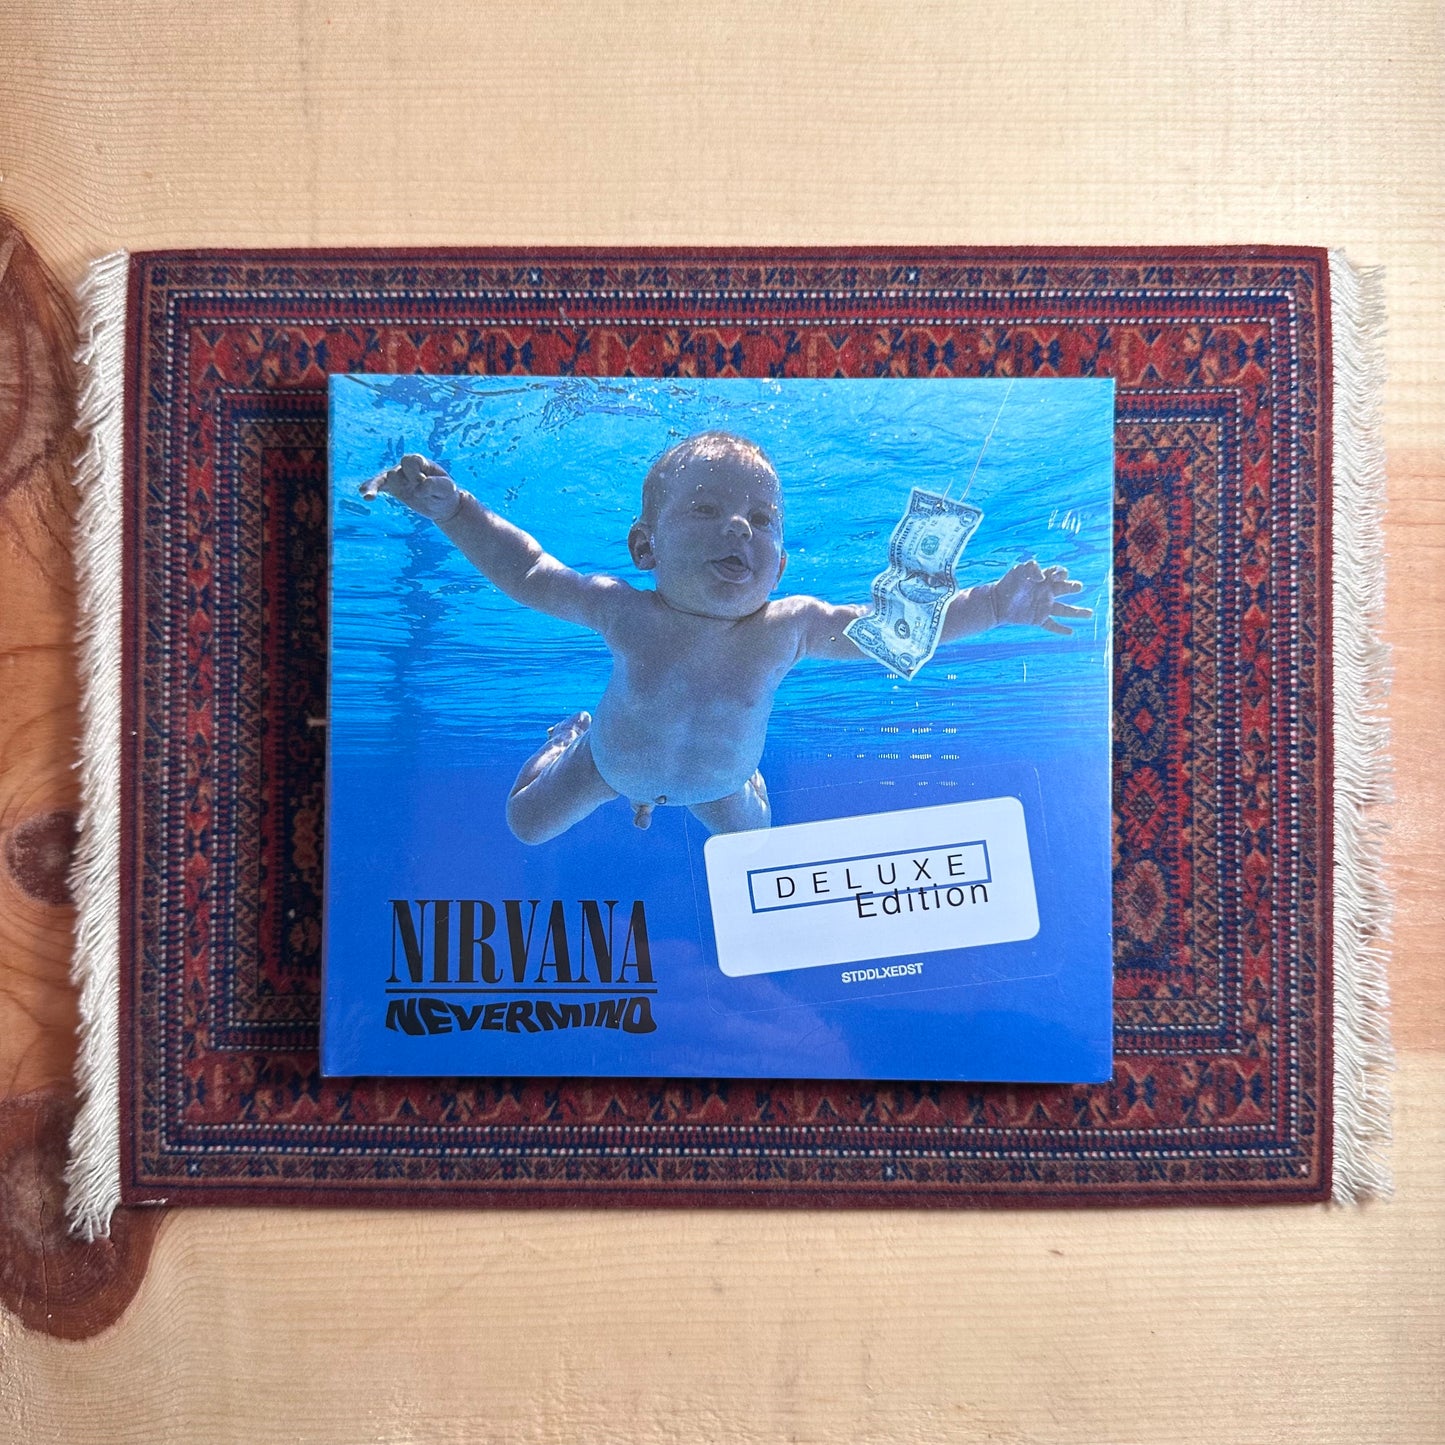 Nirvana - Nevermind (Deluxe Edition) [2 CDs]